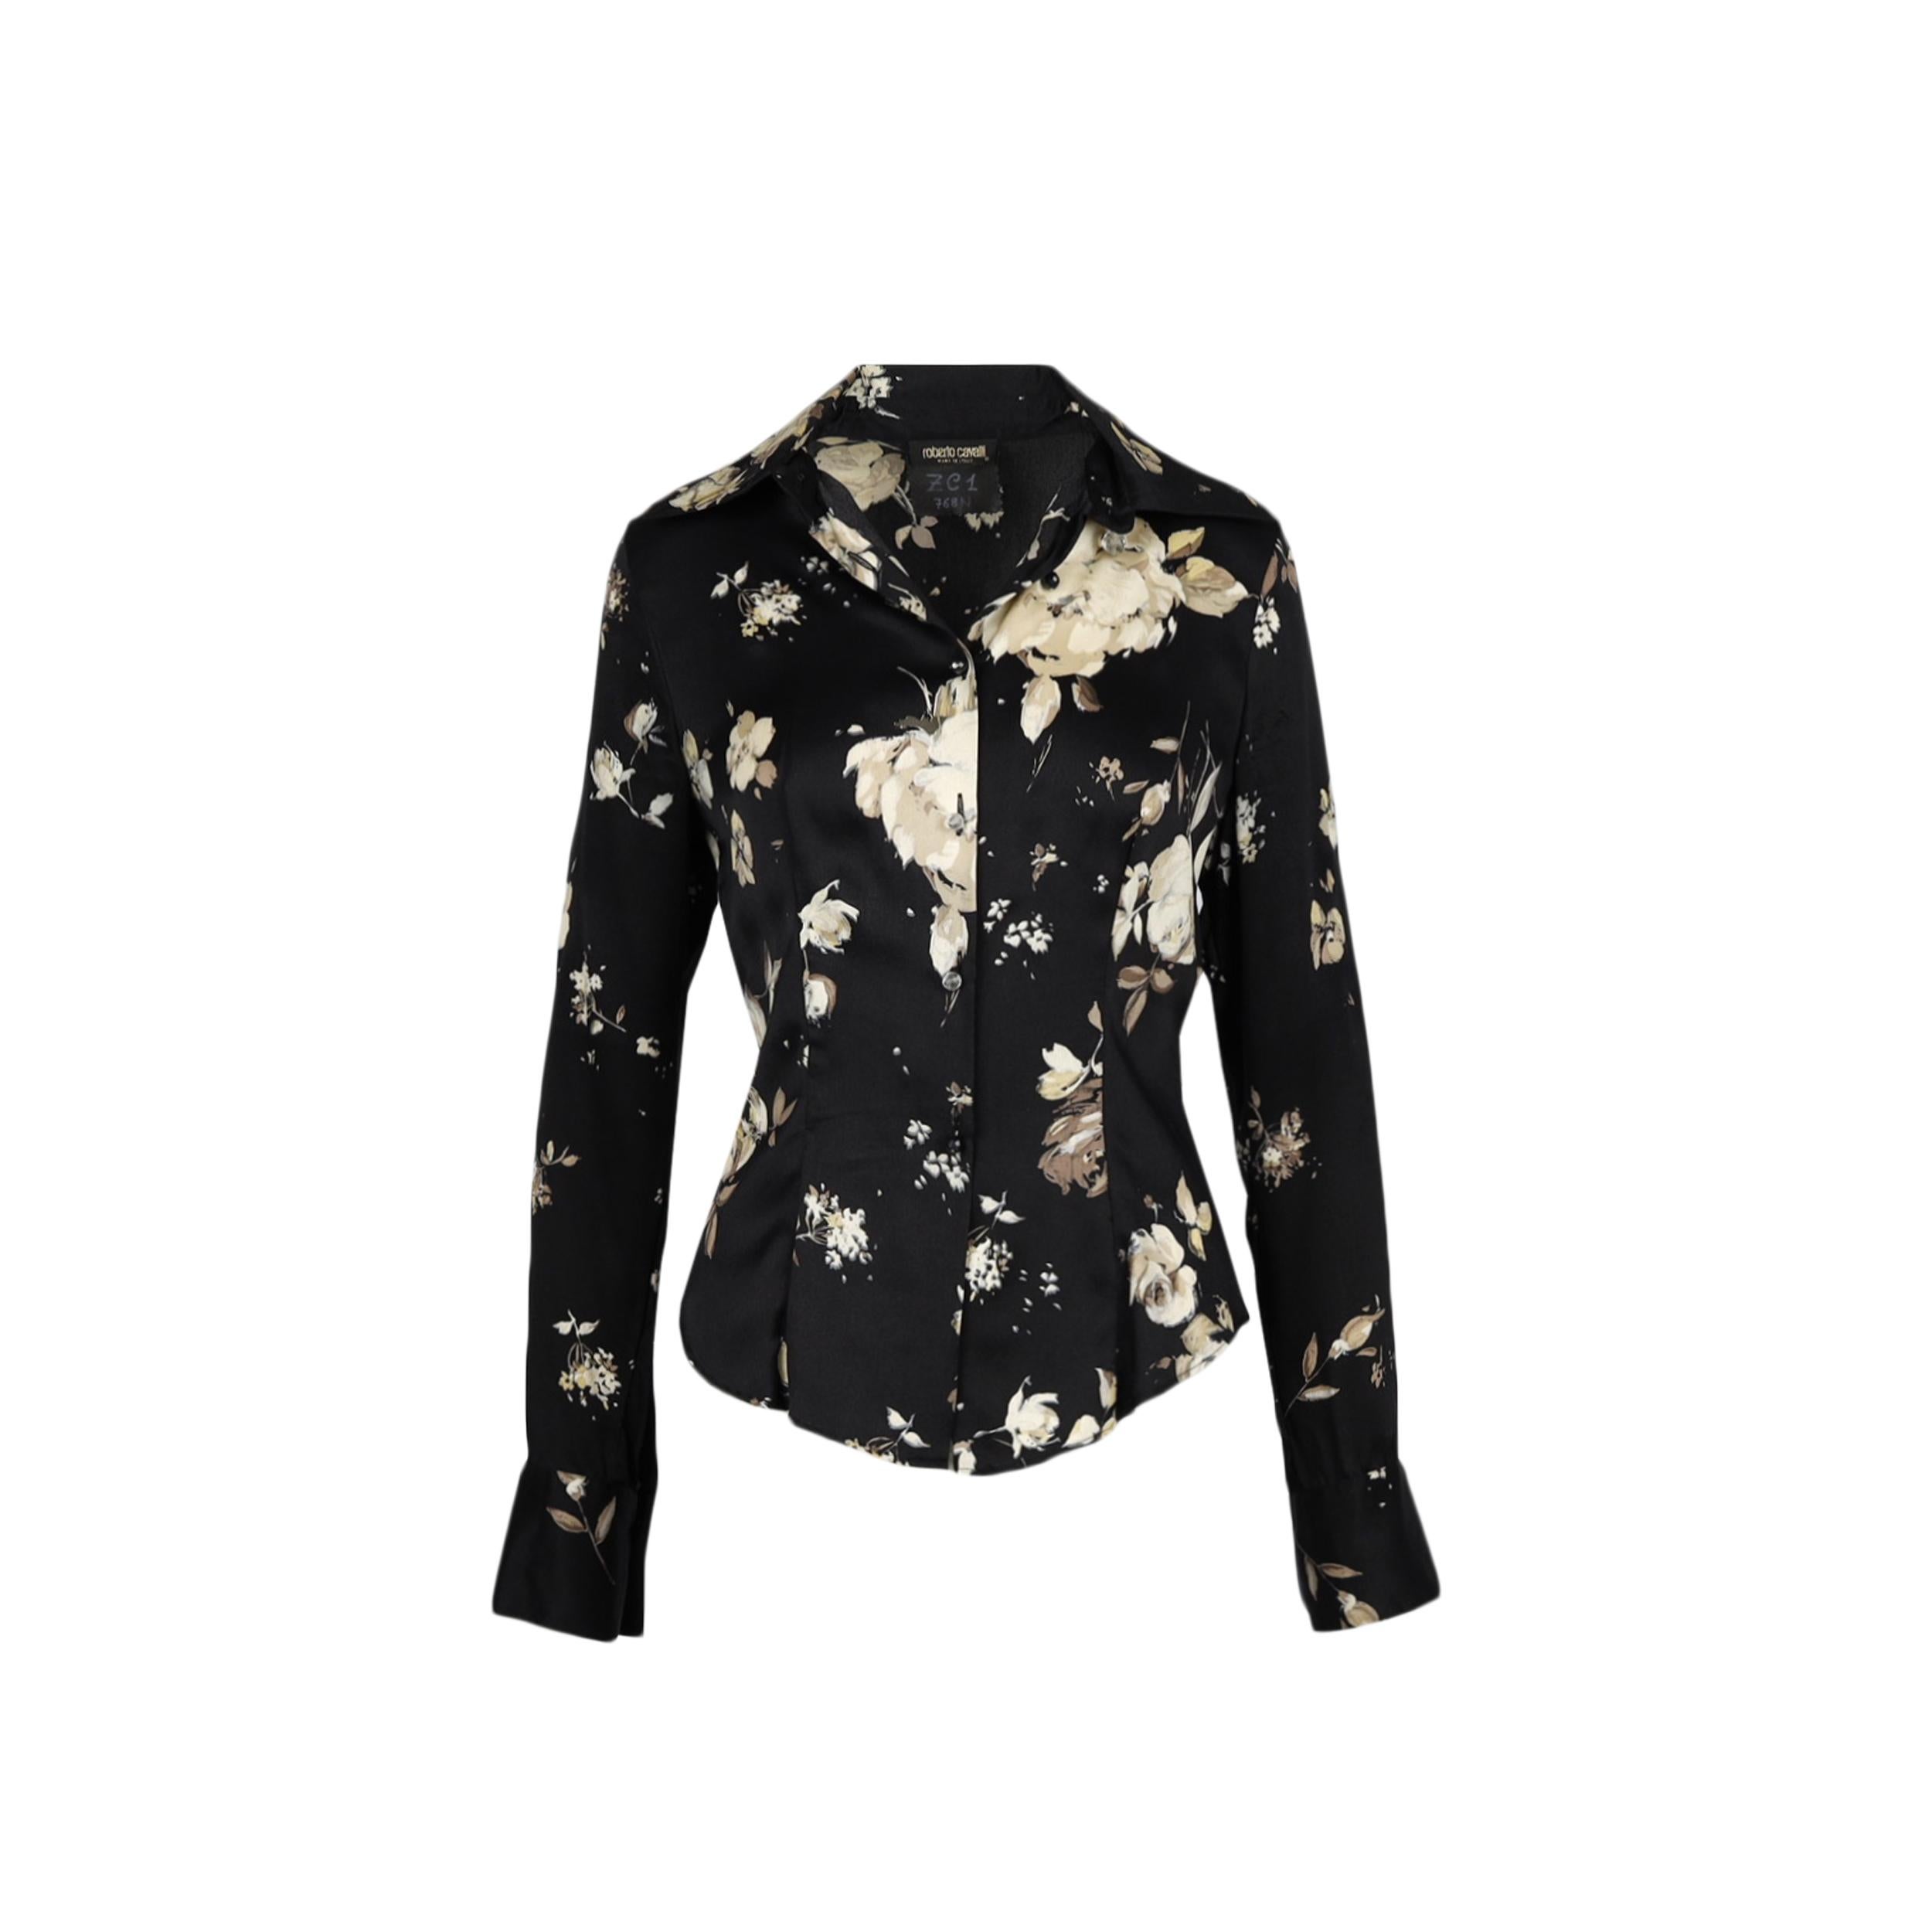 Roberto Cavalli Black Flower Printed Skirt and Top Suit  For Sale 3